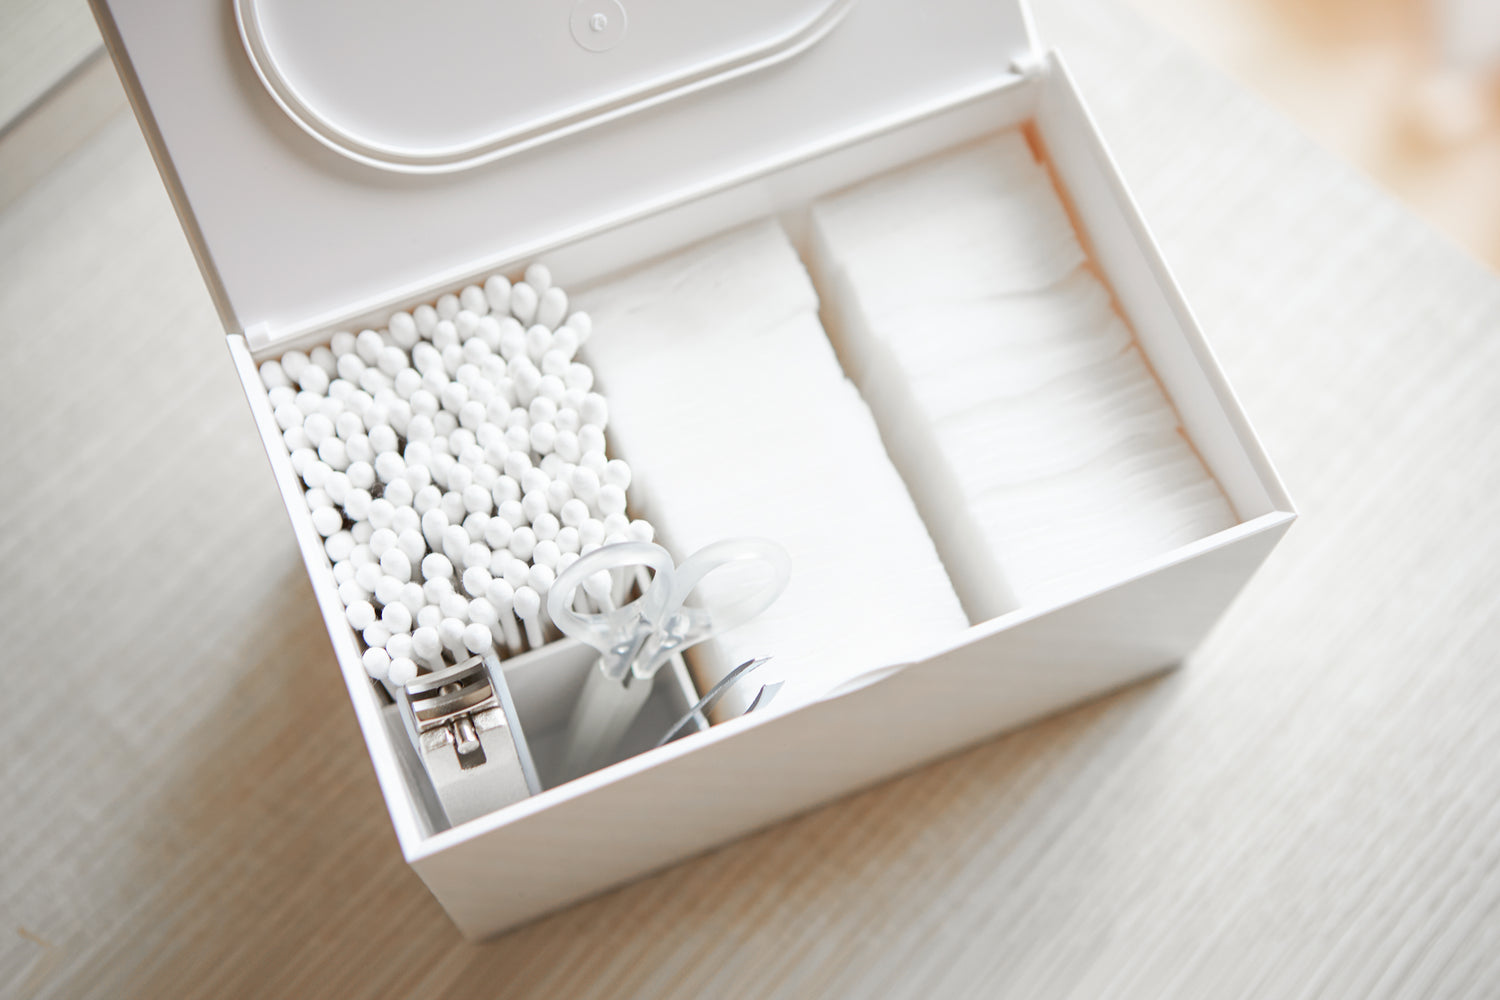 View 4 - Aerial view of white Skincare Organizer holding cotton pads, cotton tips, and nail utensils by Yamazaki Home.